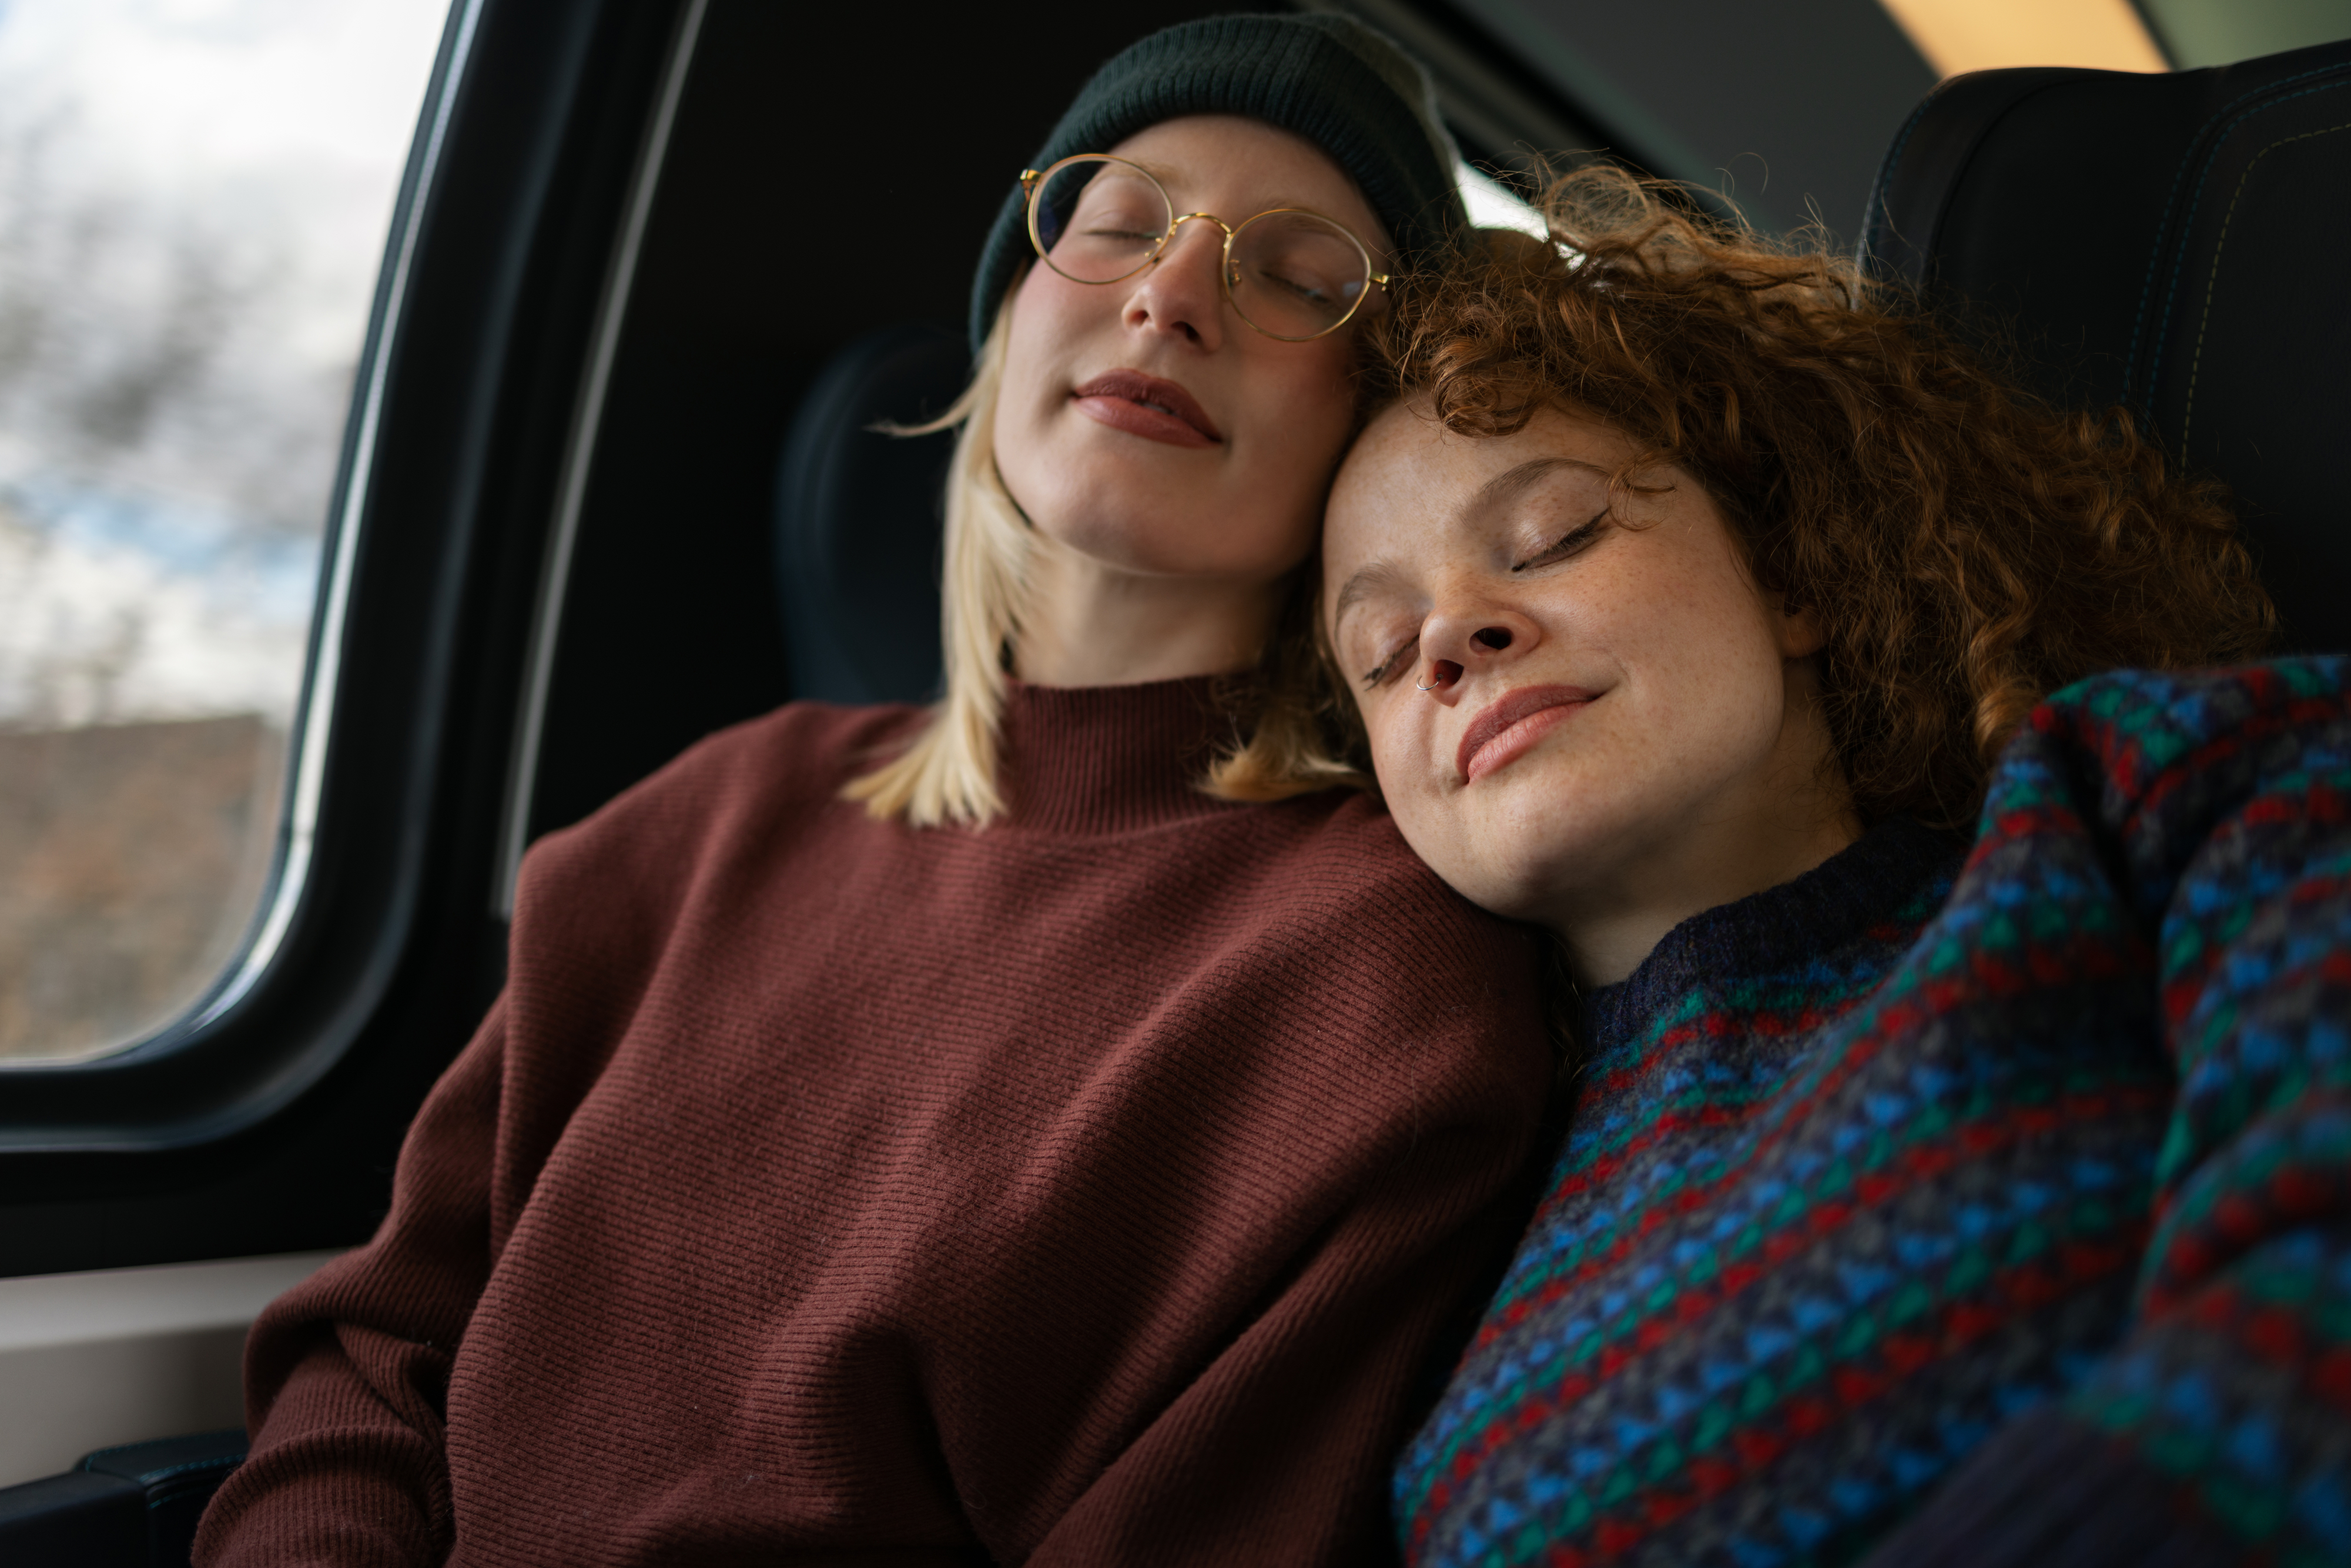 An image of two women sleeping happily in a car, leaning against each other